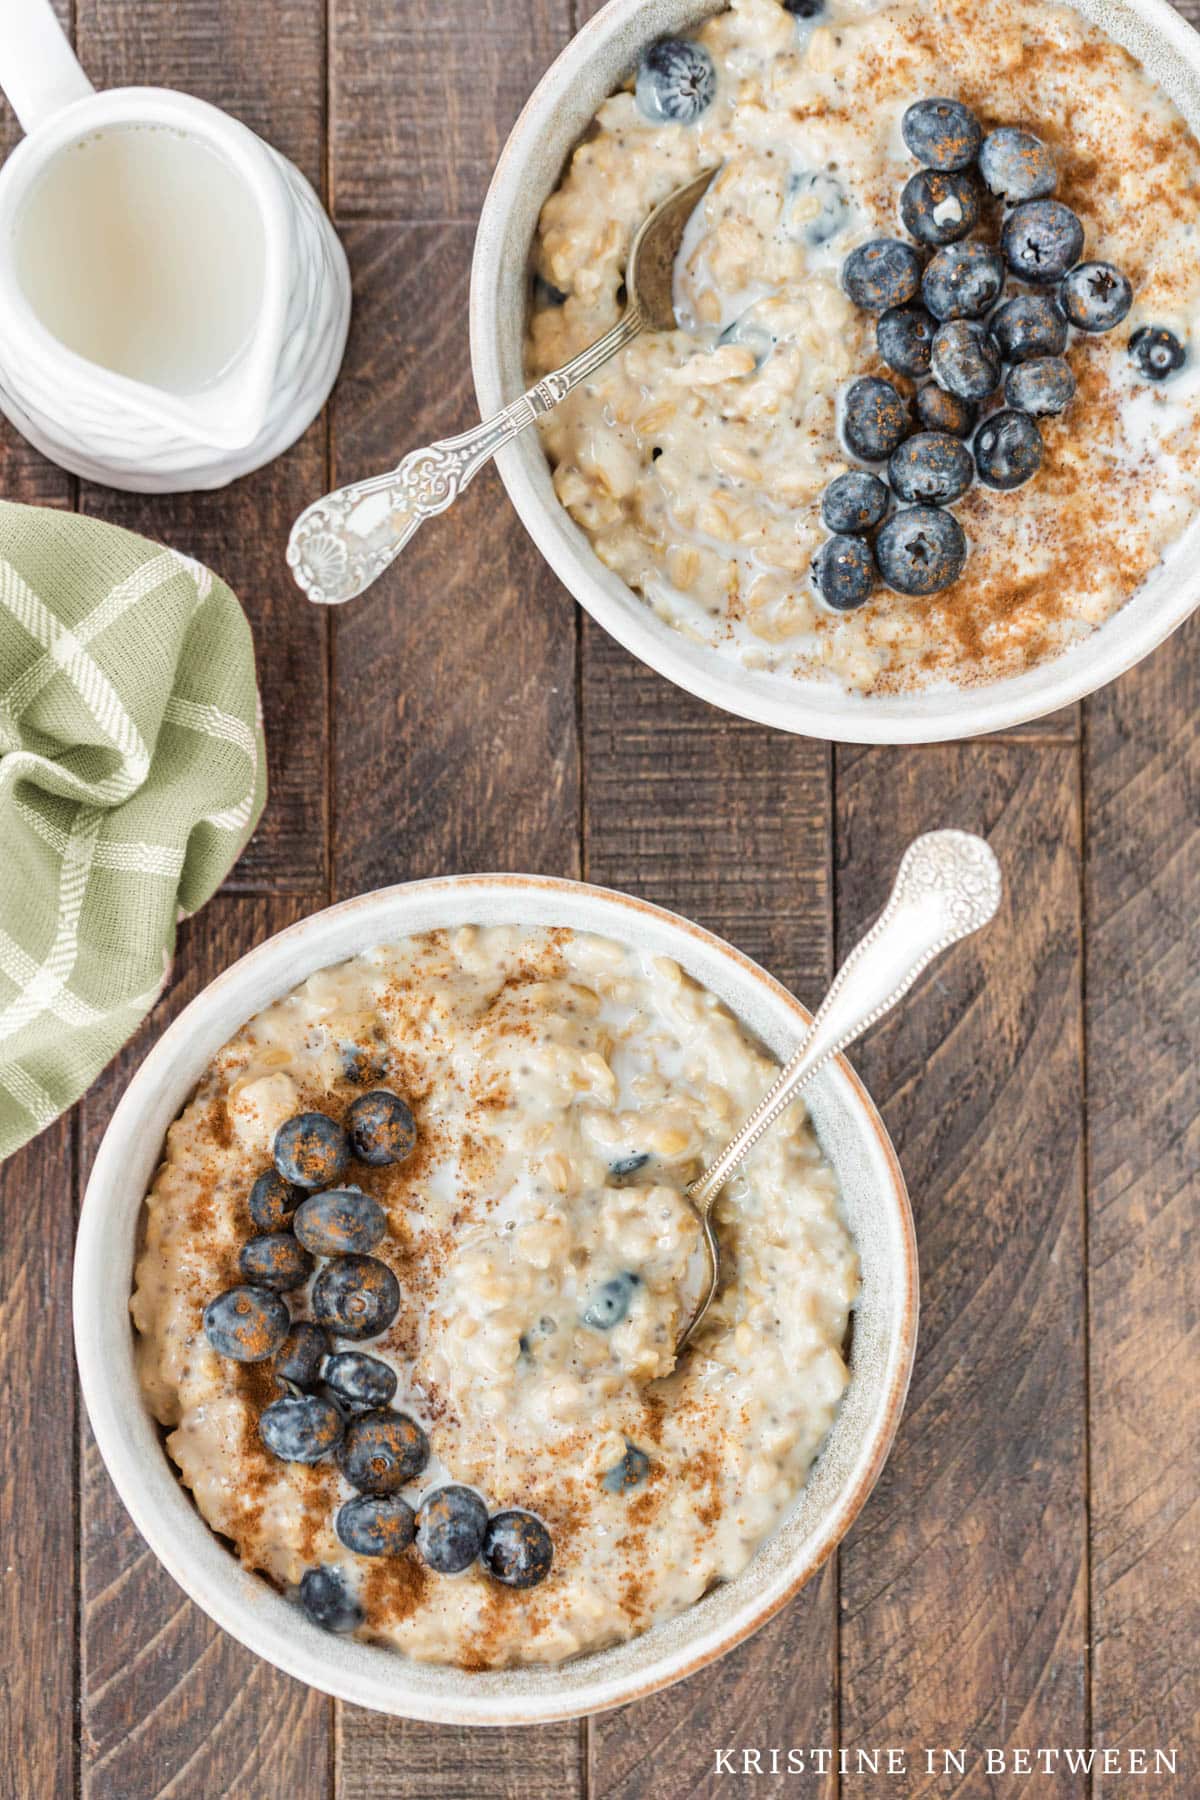 Two bowls of oatmeal topped with blueberries and cinnamon with spoons in them.